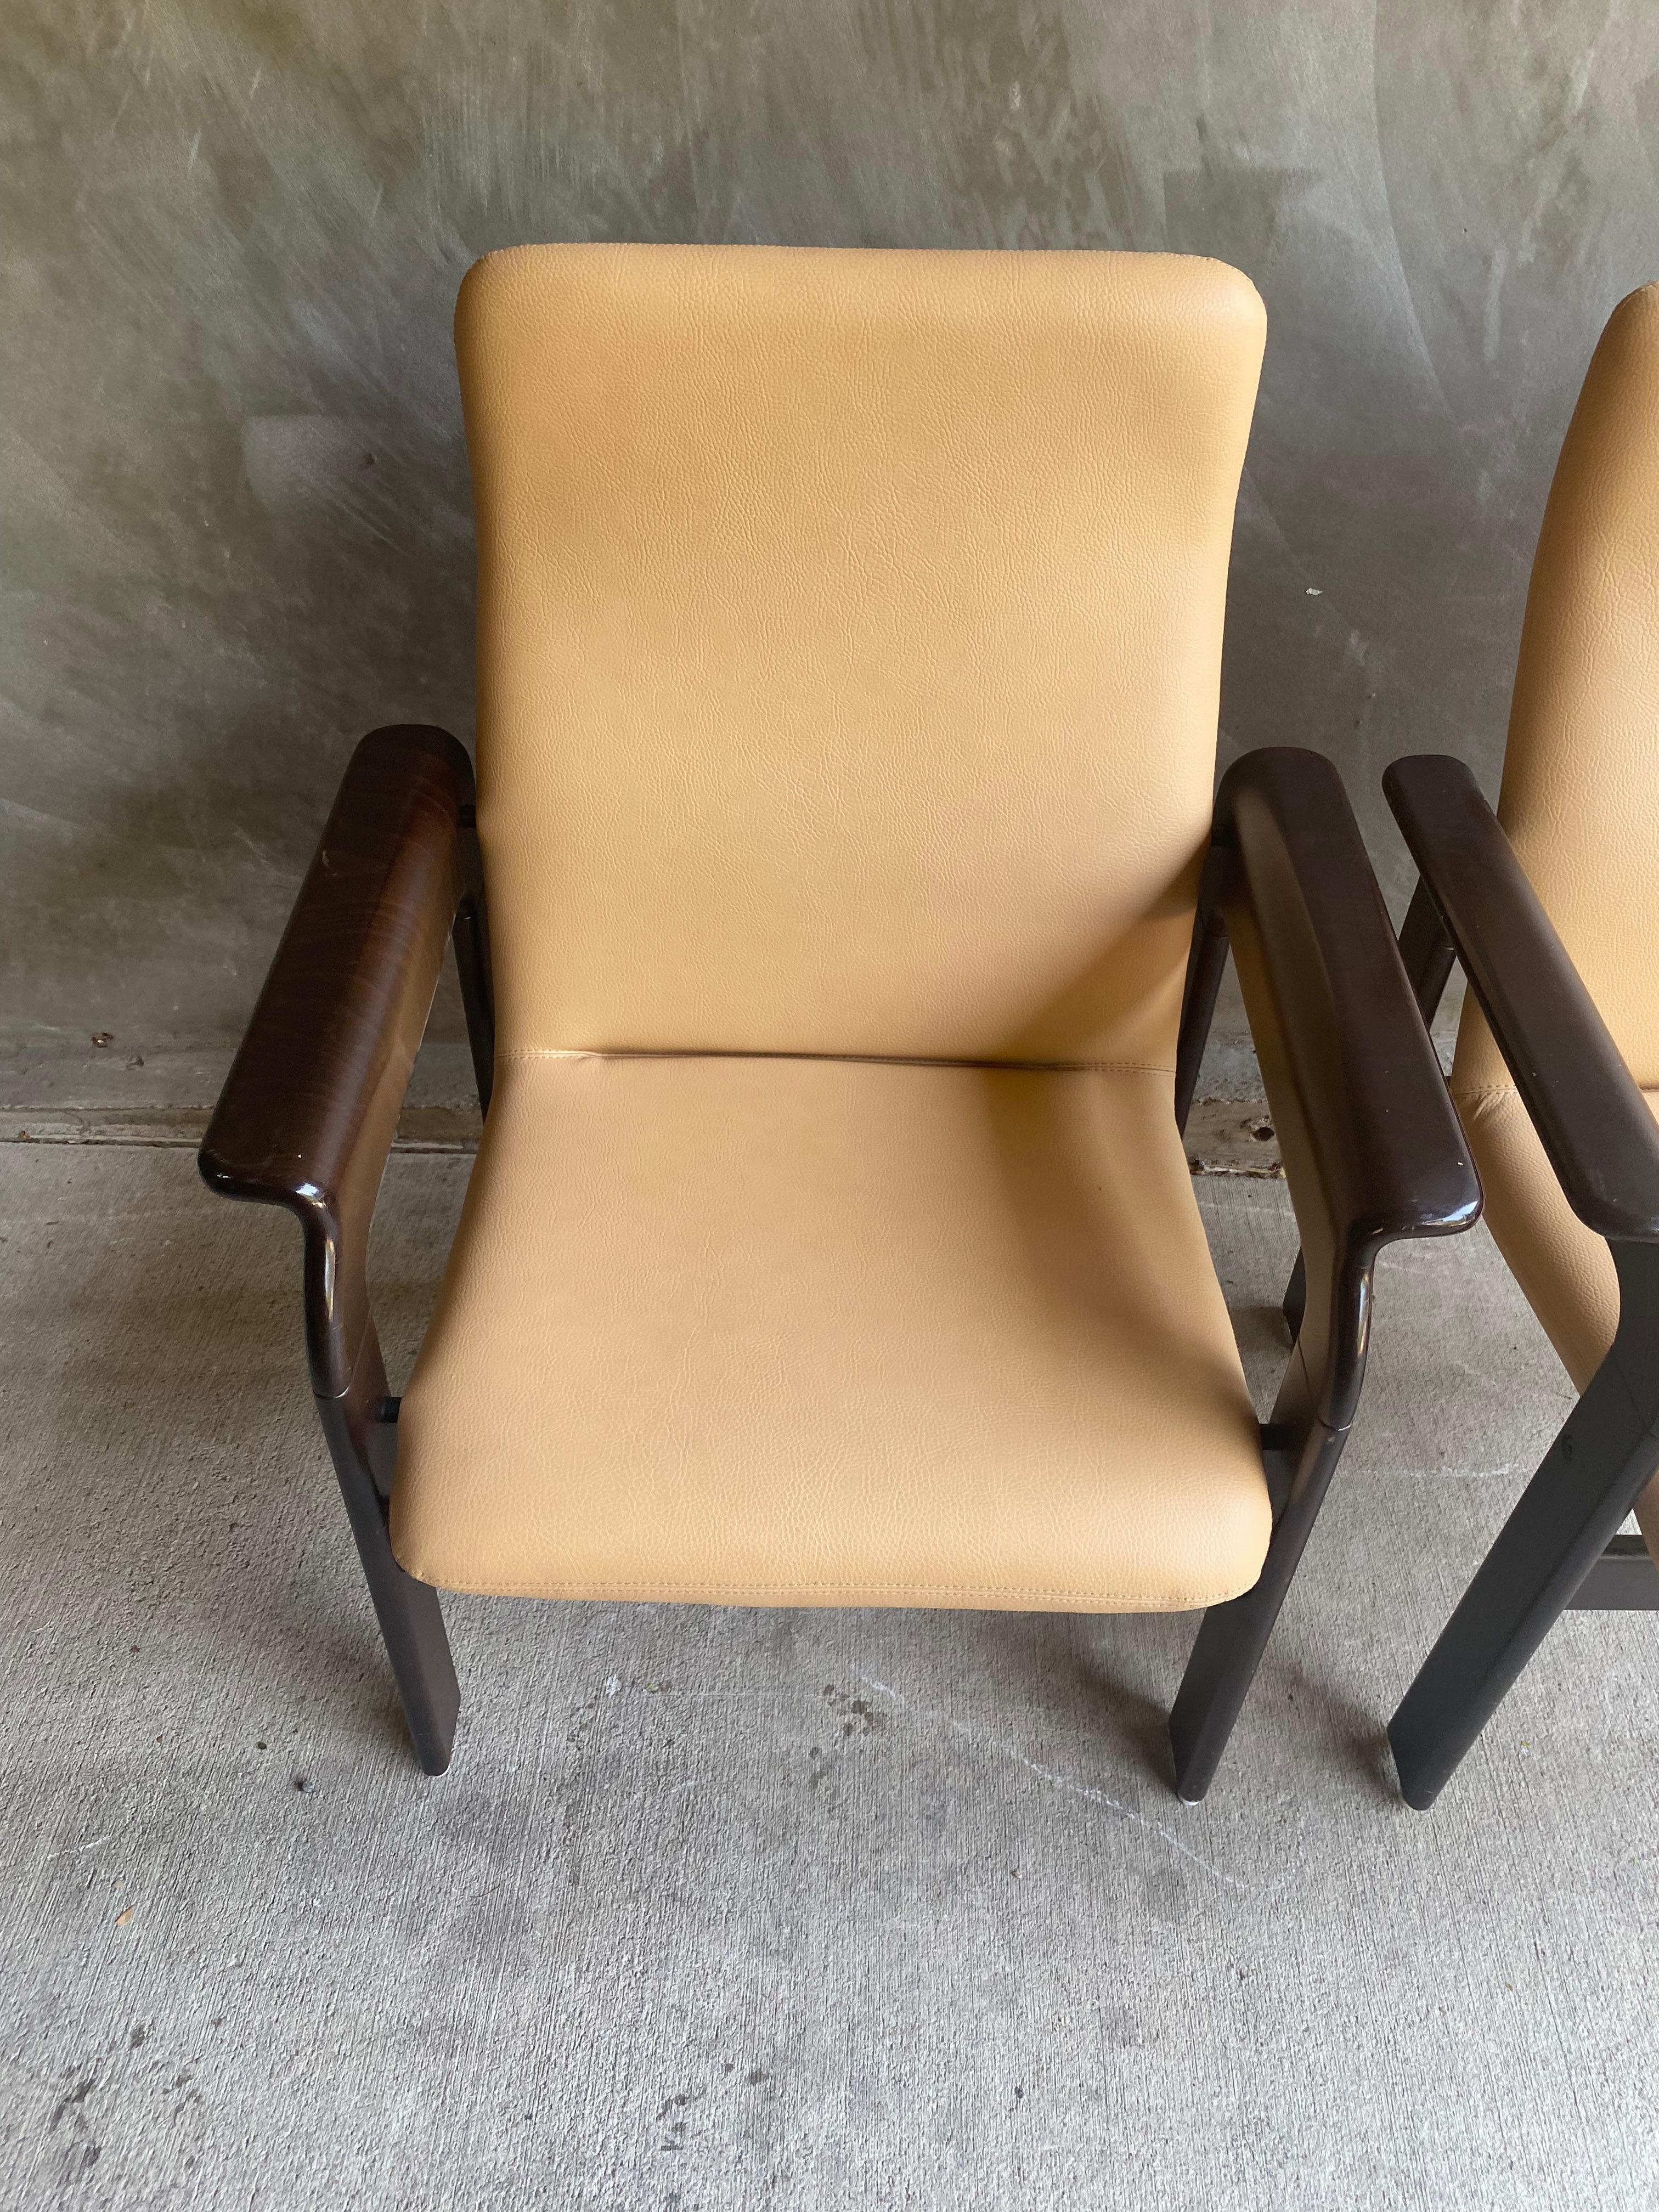 Ebonized Pair of High Back Leather Armchairs, by Bruno Rey for Dietiker